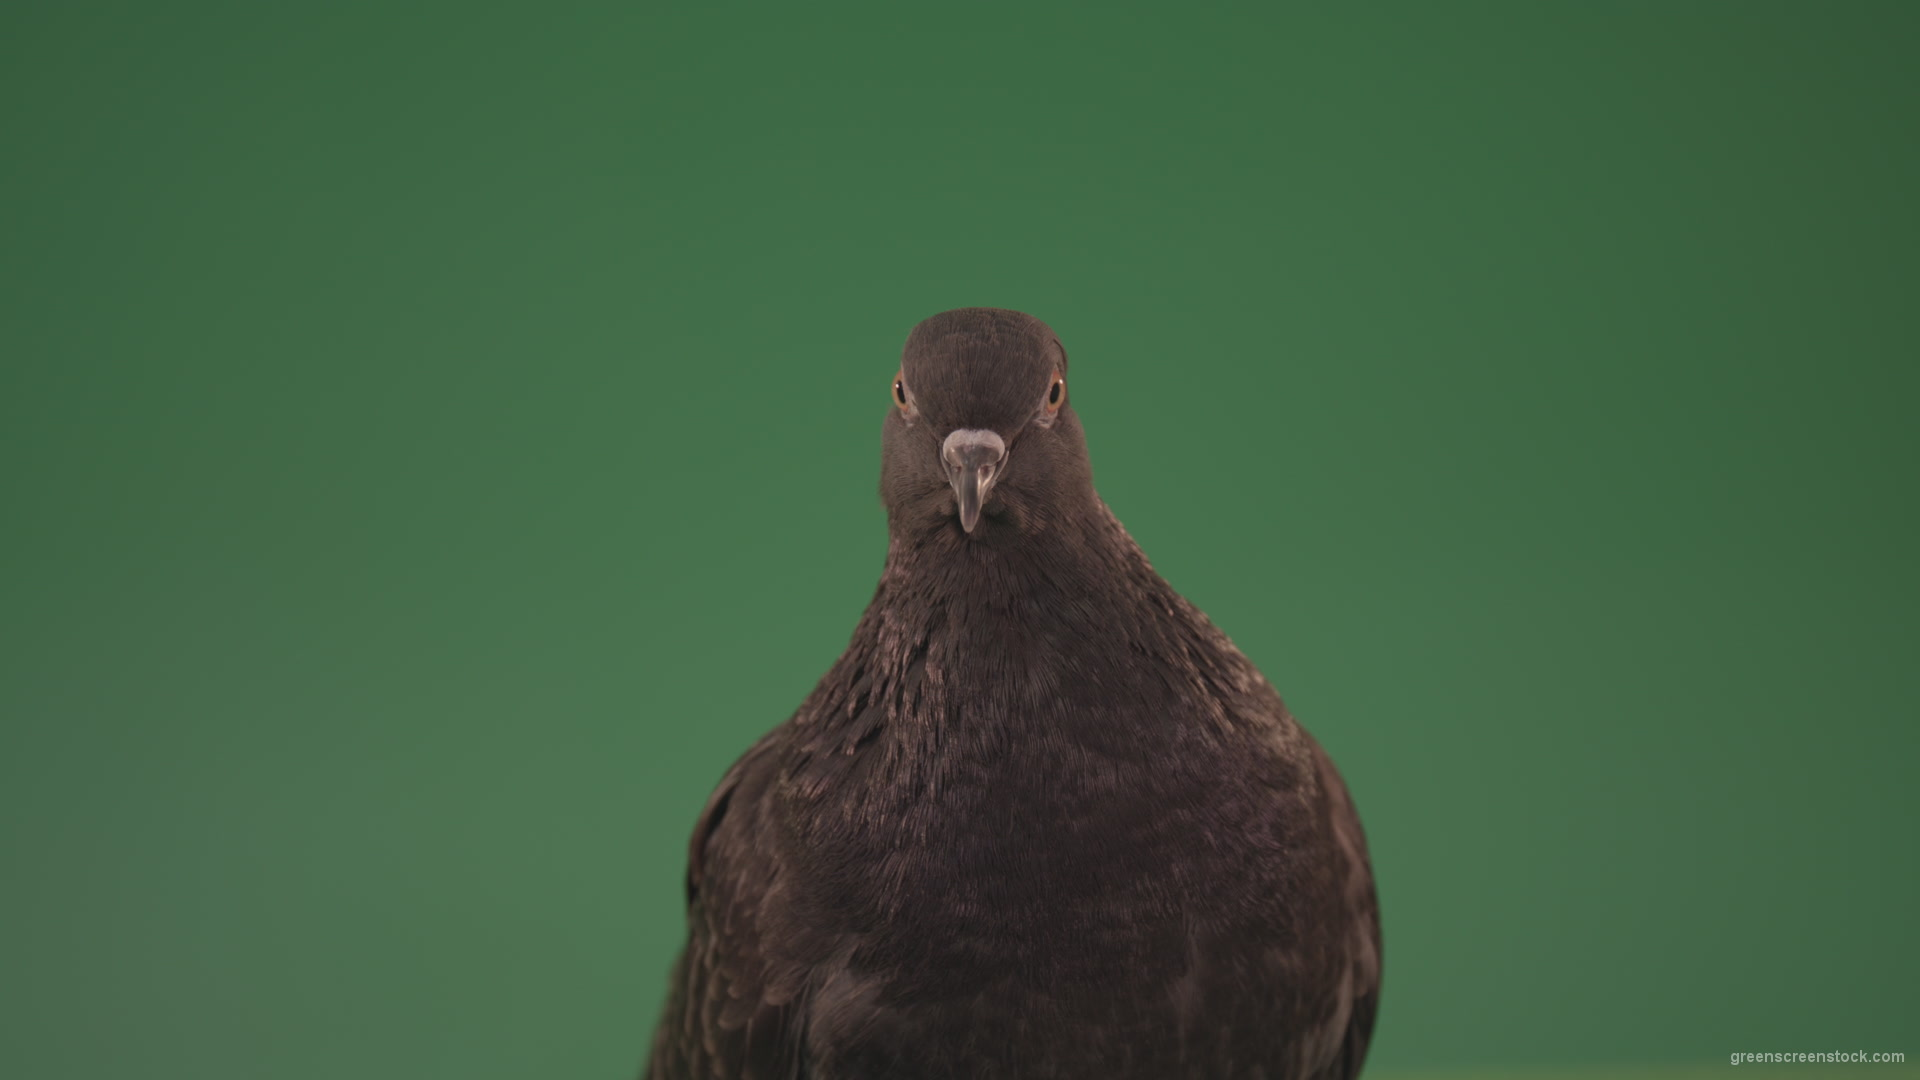 Bird-of-pigeon-is-sitting-on-the-house-and-looking-at-the-city-isolated-on-chromakey-background_002 Green Screen Stock